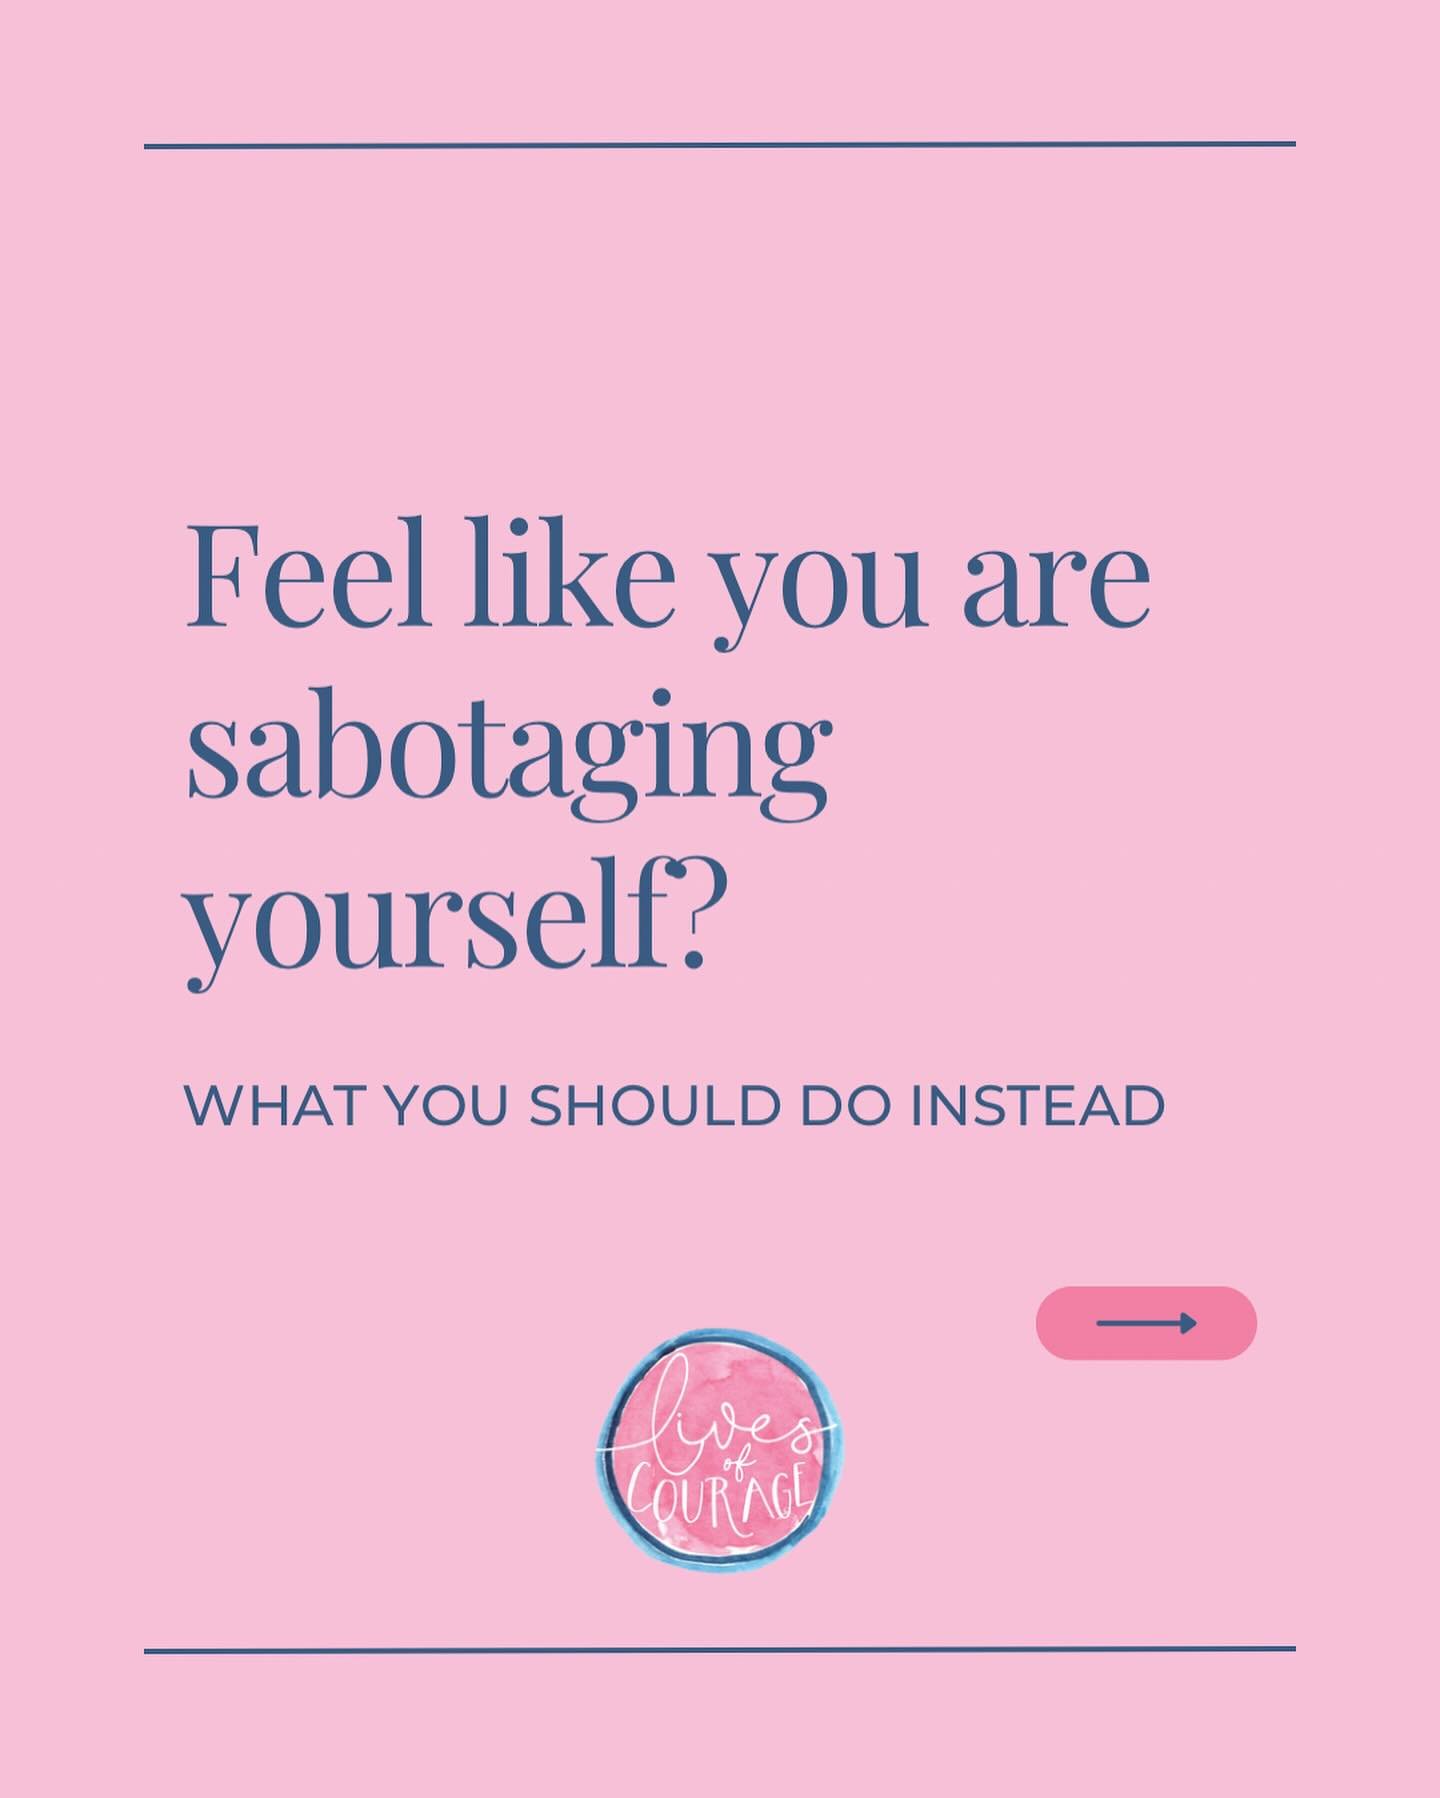 Sharing a little slice of my self-sabotage journey because let&rsquo;s be real, we&rsquo;re all navigating our way through it. 

Ever found yourself tangled up in the overwhelming urge to change everything about your life in one fell swoop? It&rsquo;